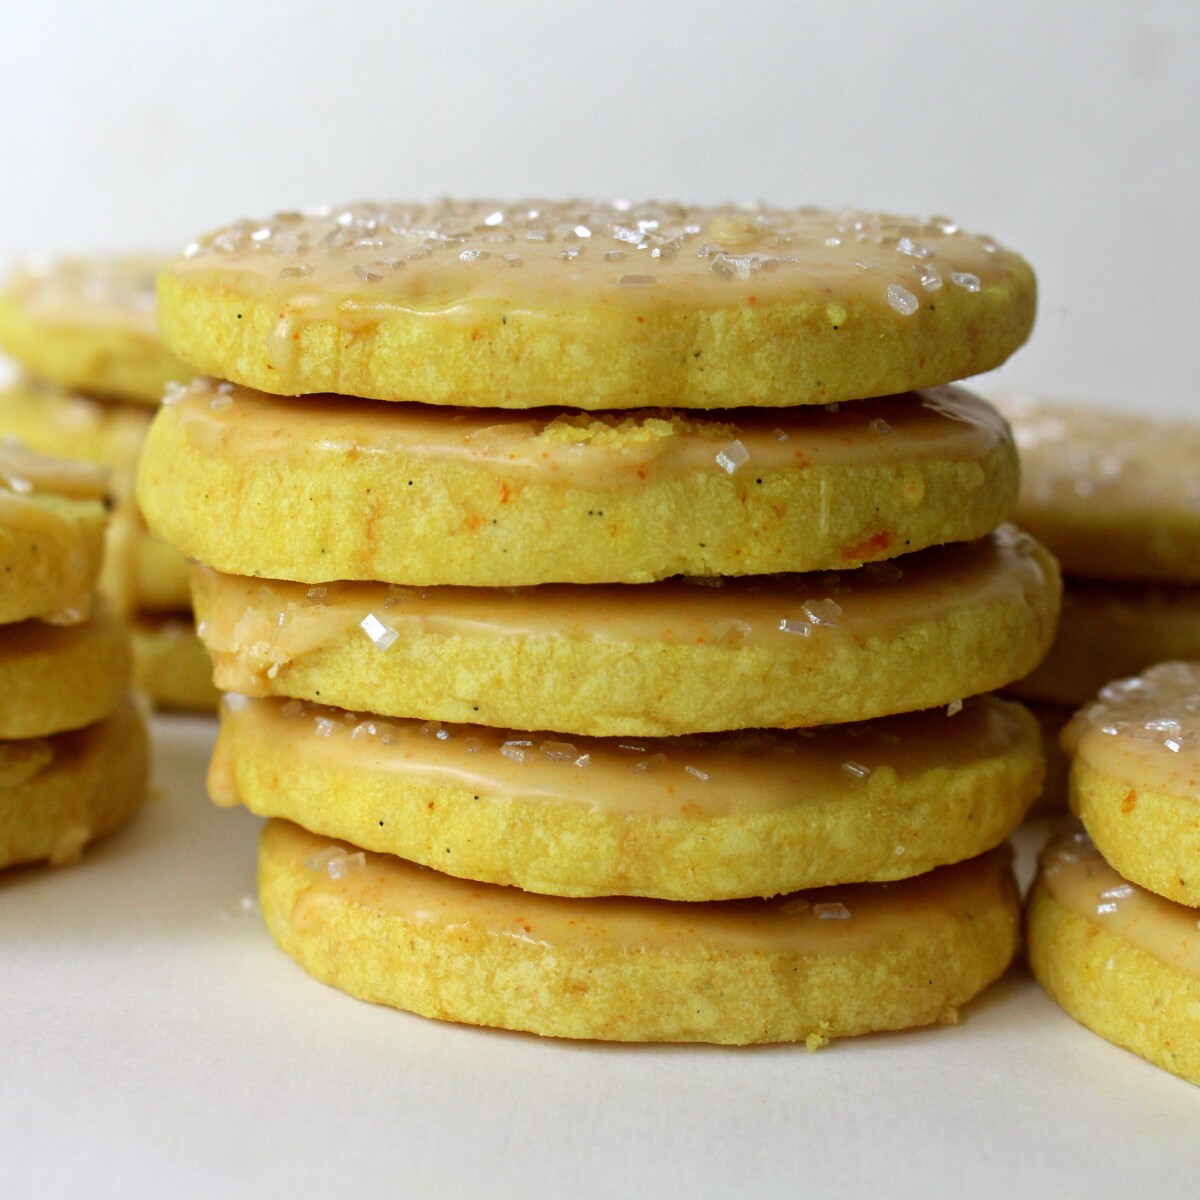 A stack of iced cookies shown from the side.